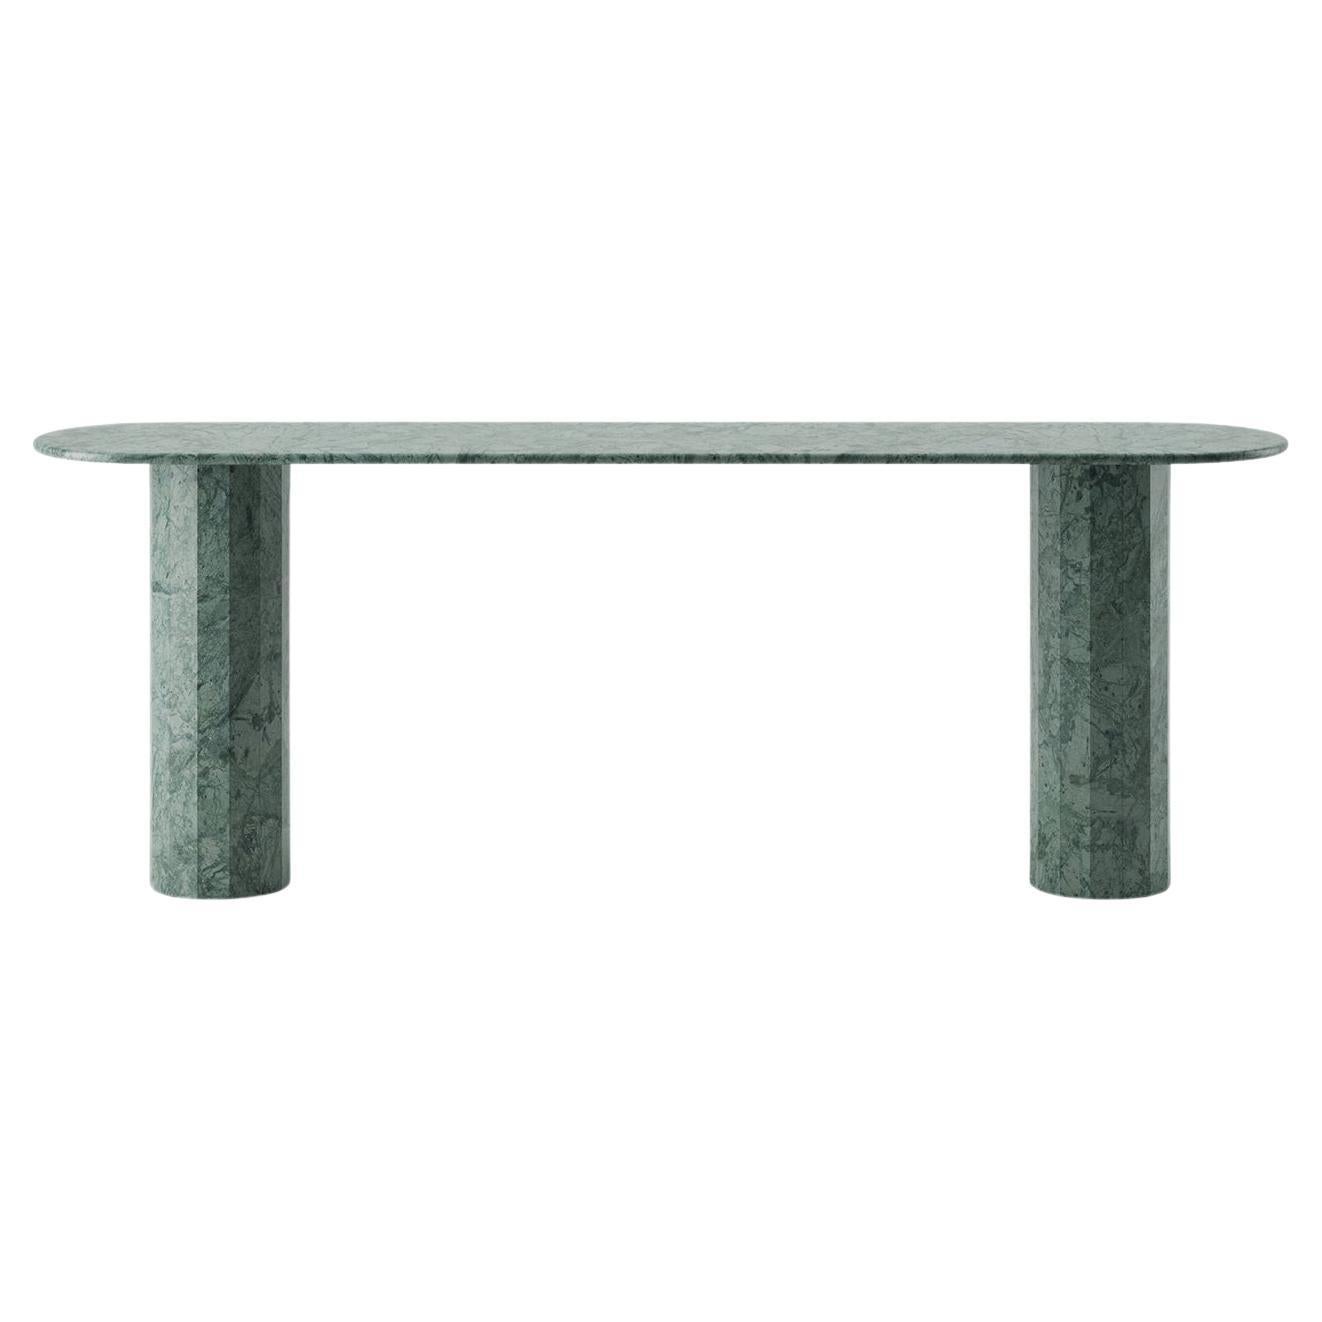 Ashby Console Handcrafted in Verde Guatemala by Lemon For Sale